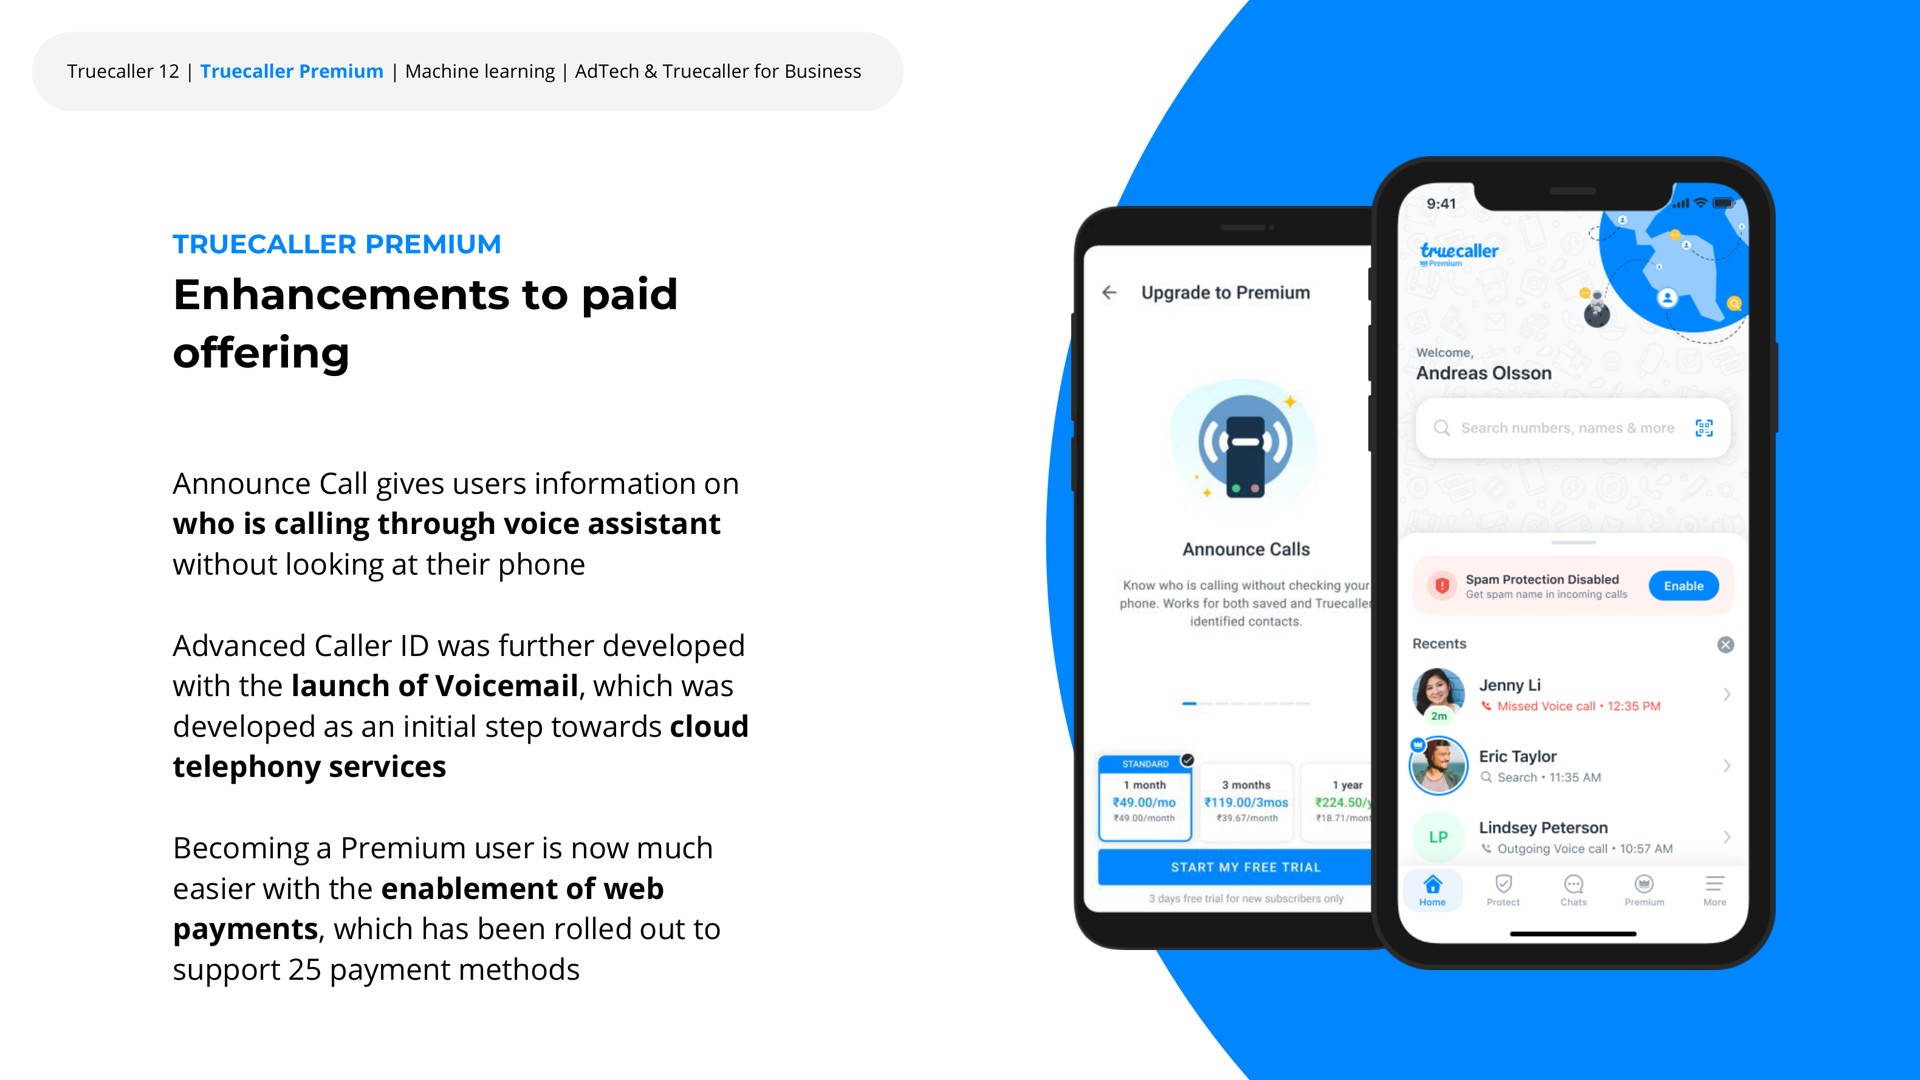 enhancements to paid offering | Truecaller